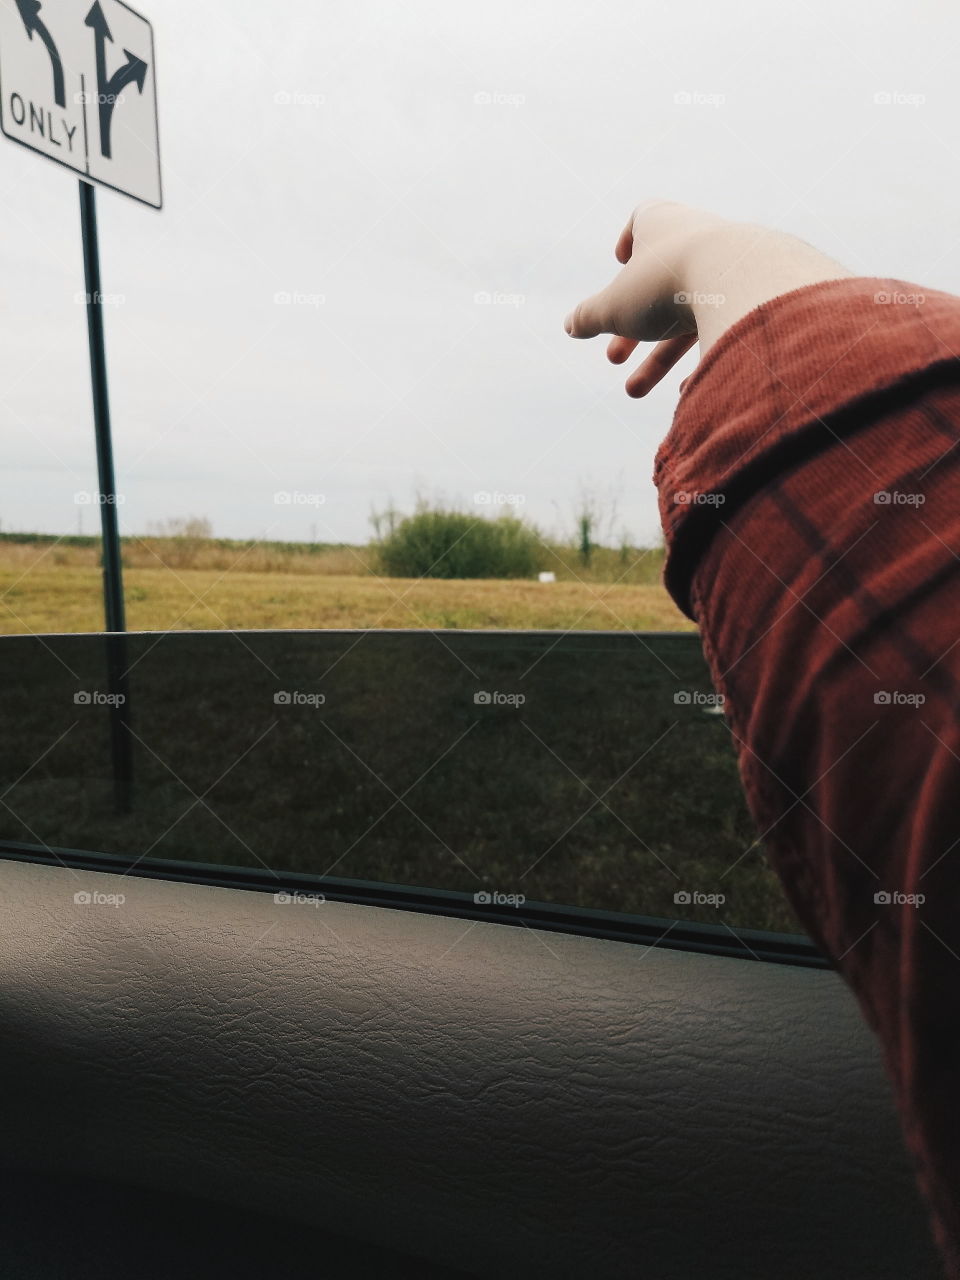 An arm outside of a window riding down a rural country road in the heart of Southern Ohio.